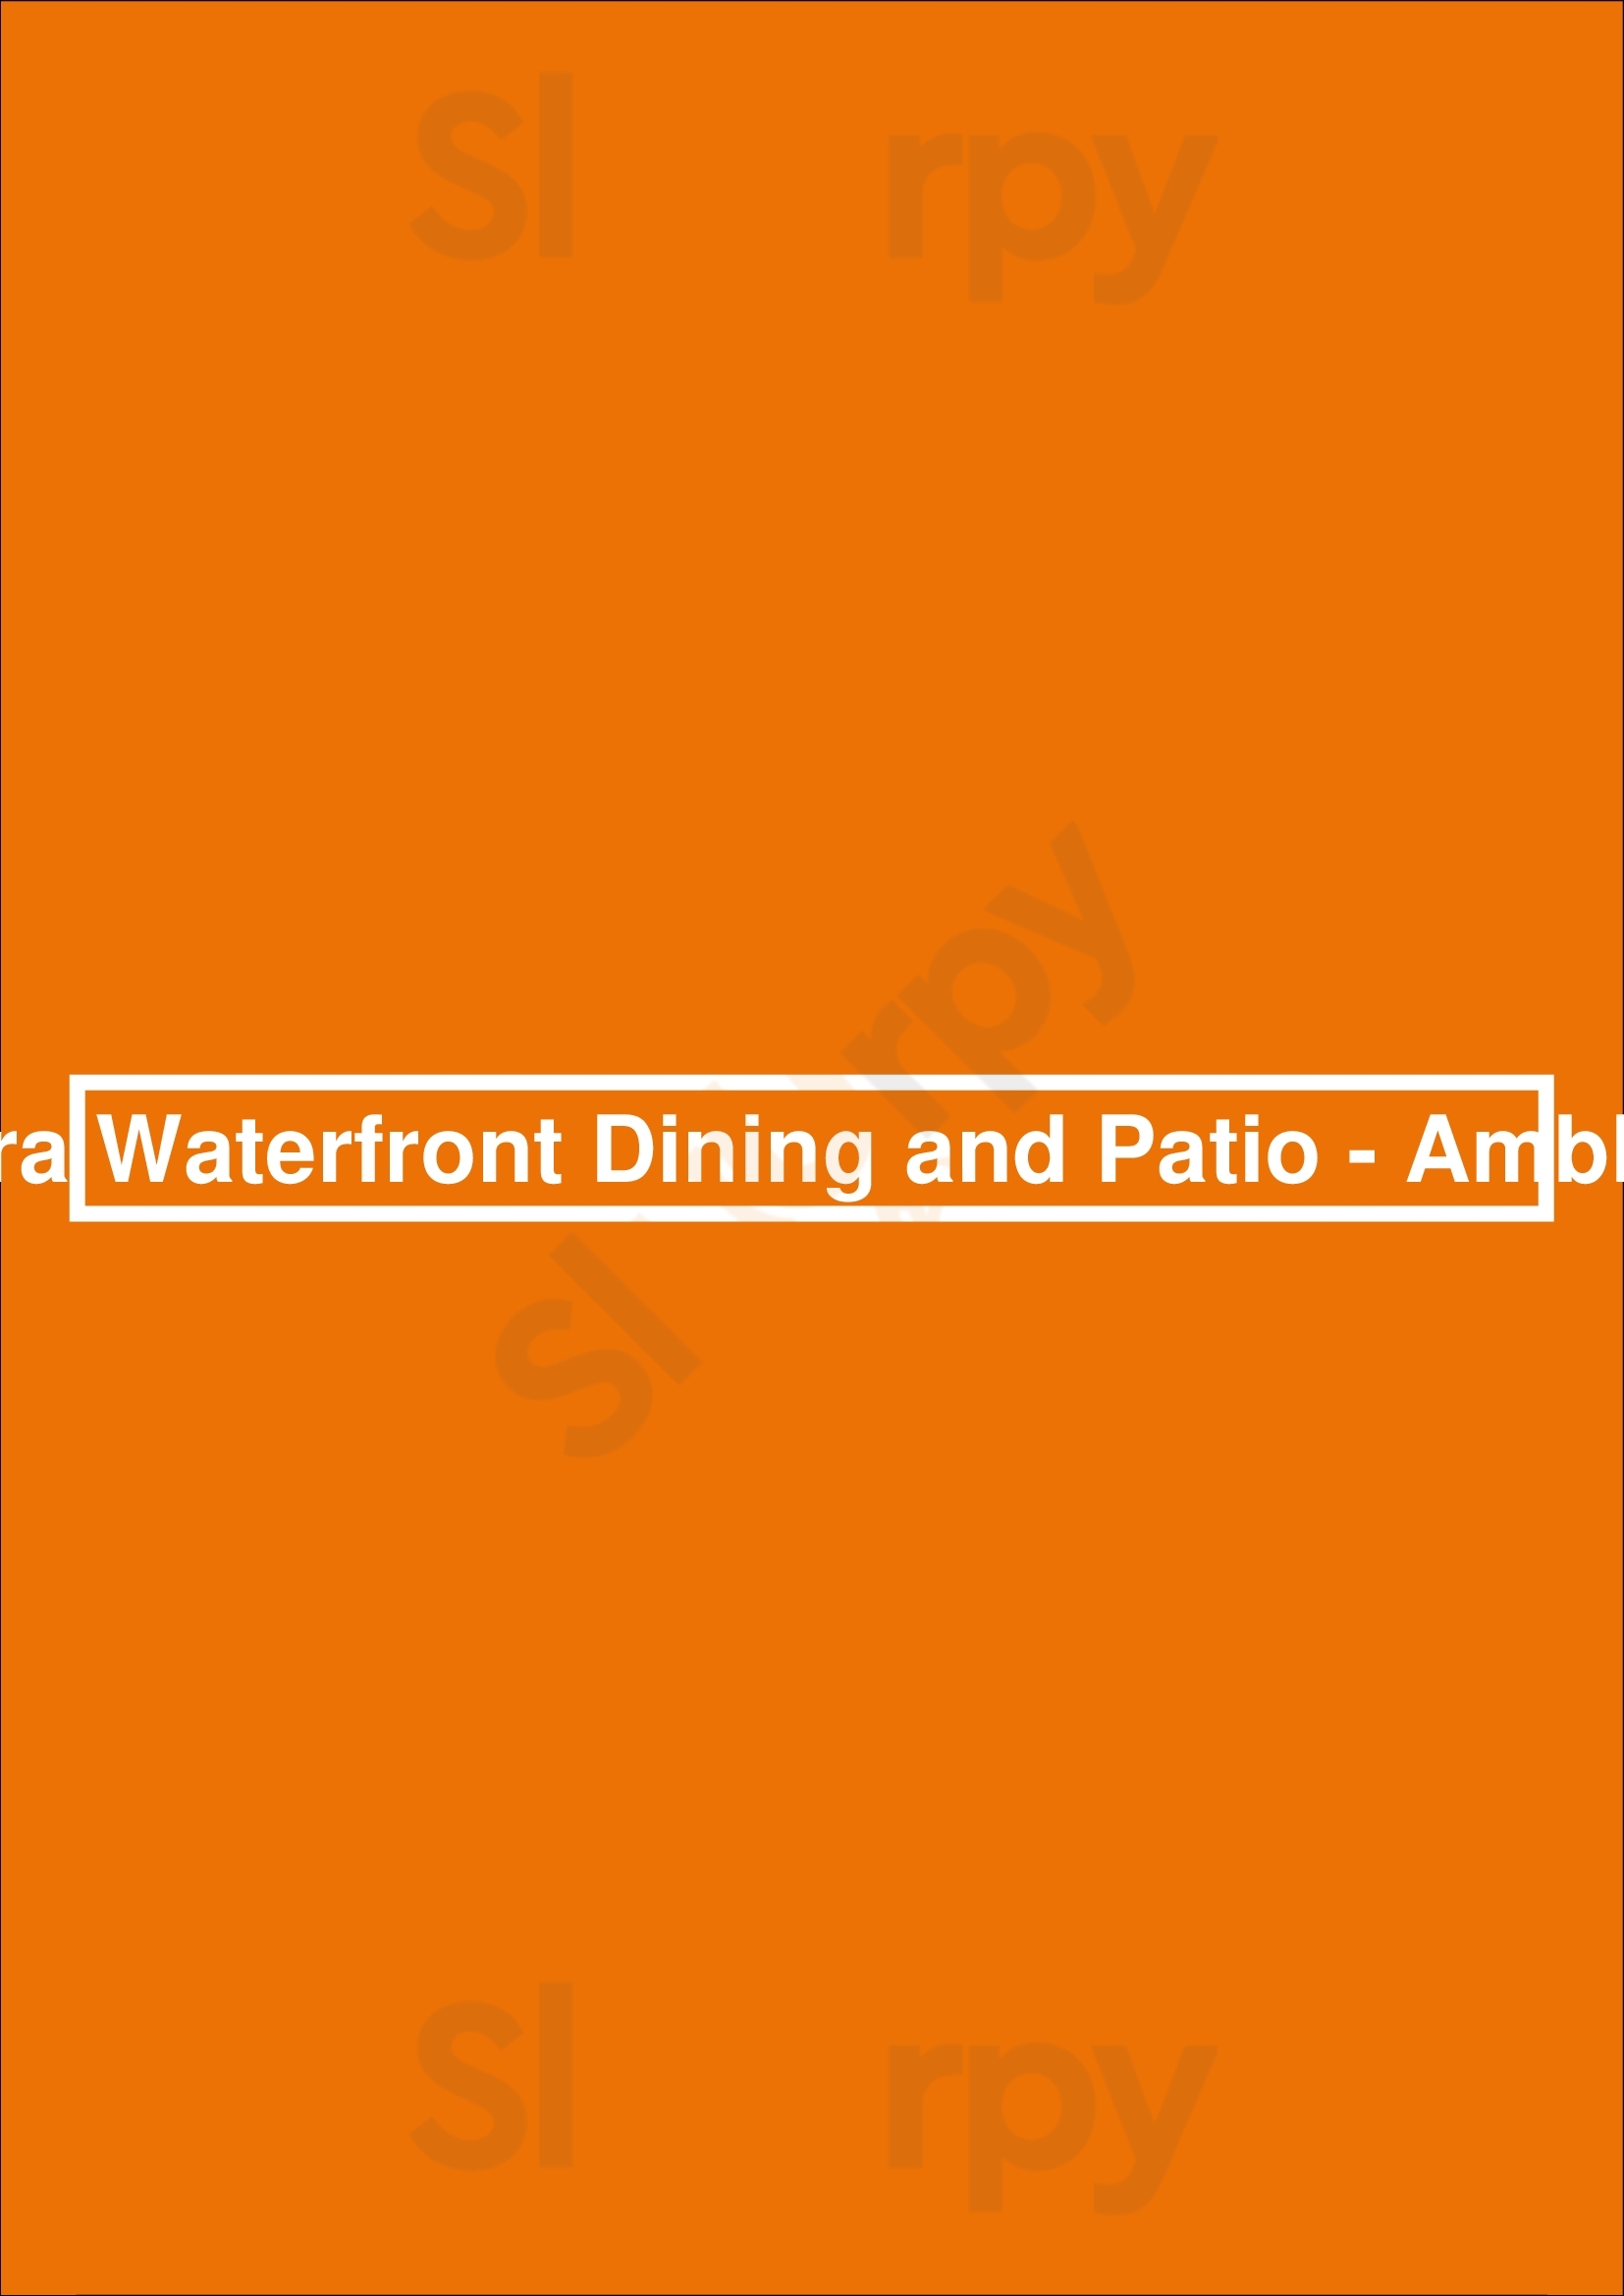 Ancora Waterfront Dining And Patio - Ambleside West Vancouver Menu - 1